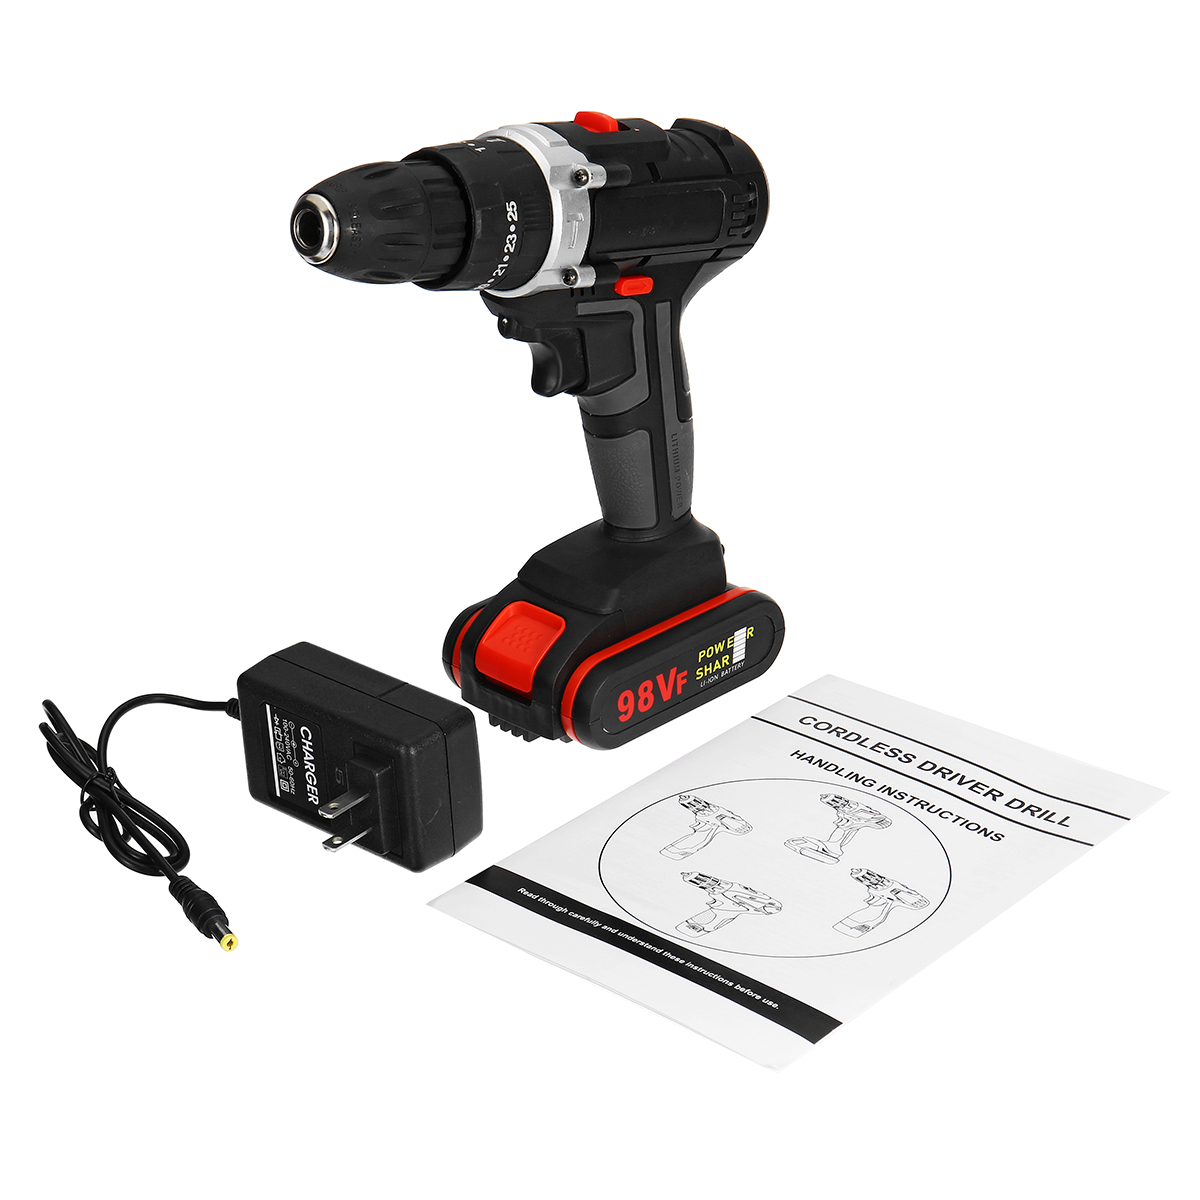 98VF-Rechargeable-Electric-Cordless-Impact-Drill-Screwdriver-251-Torque-LED-1569430-10